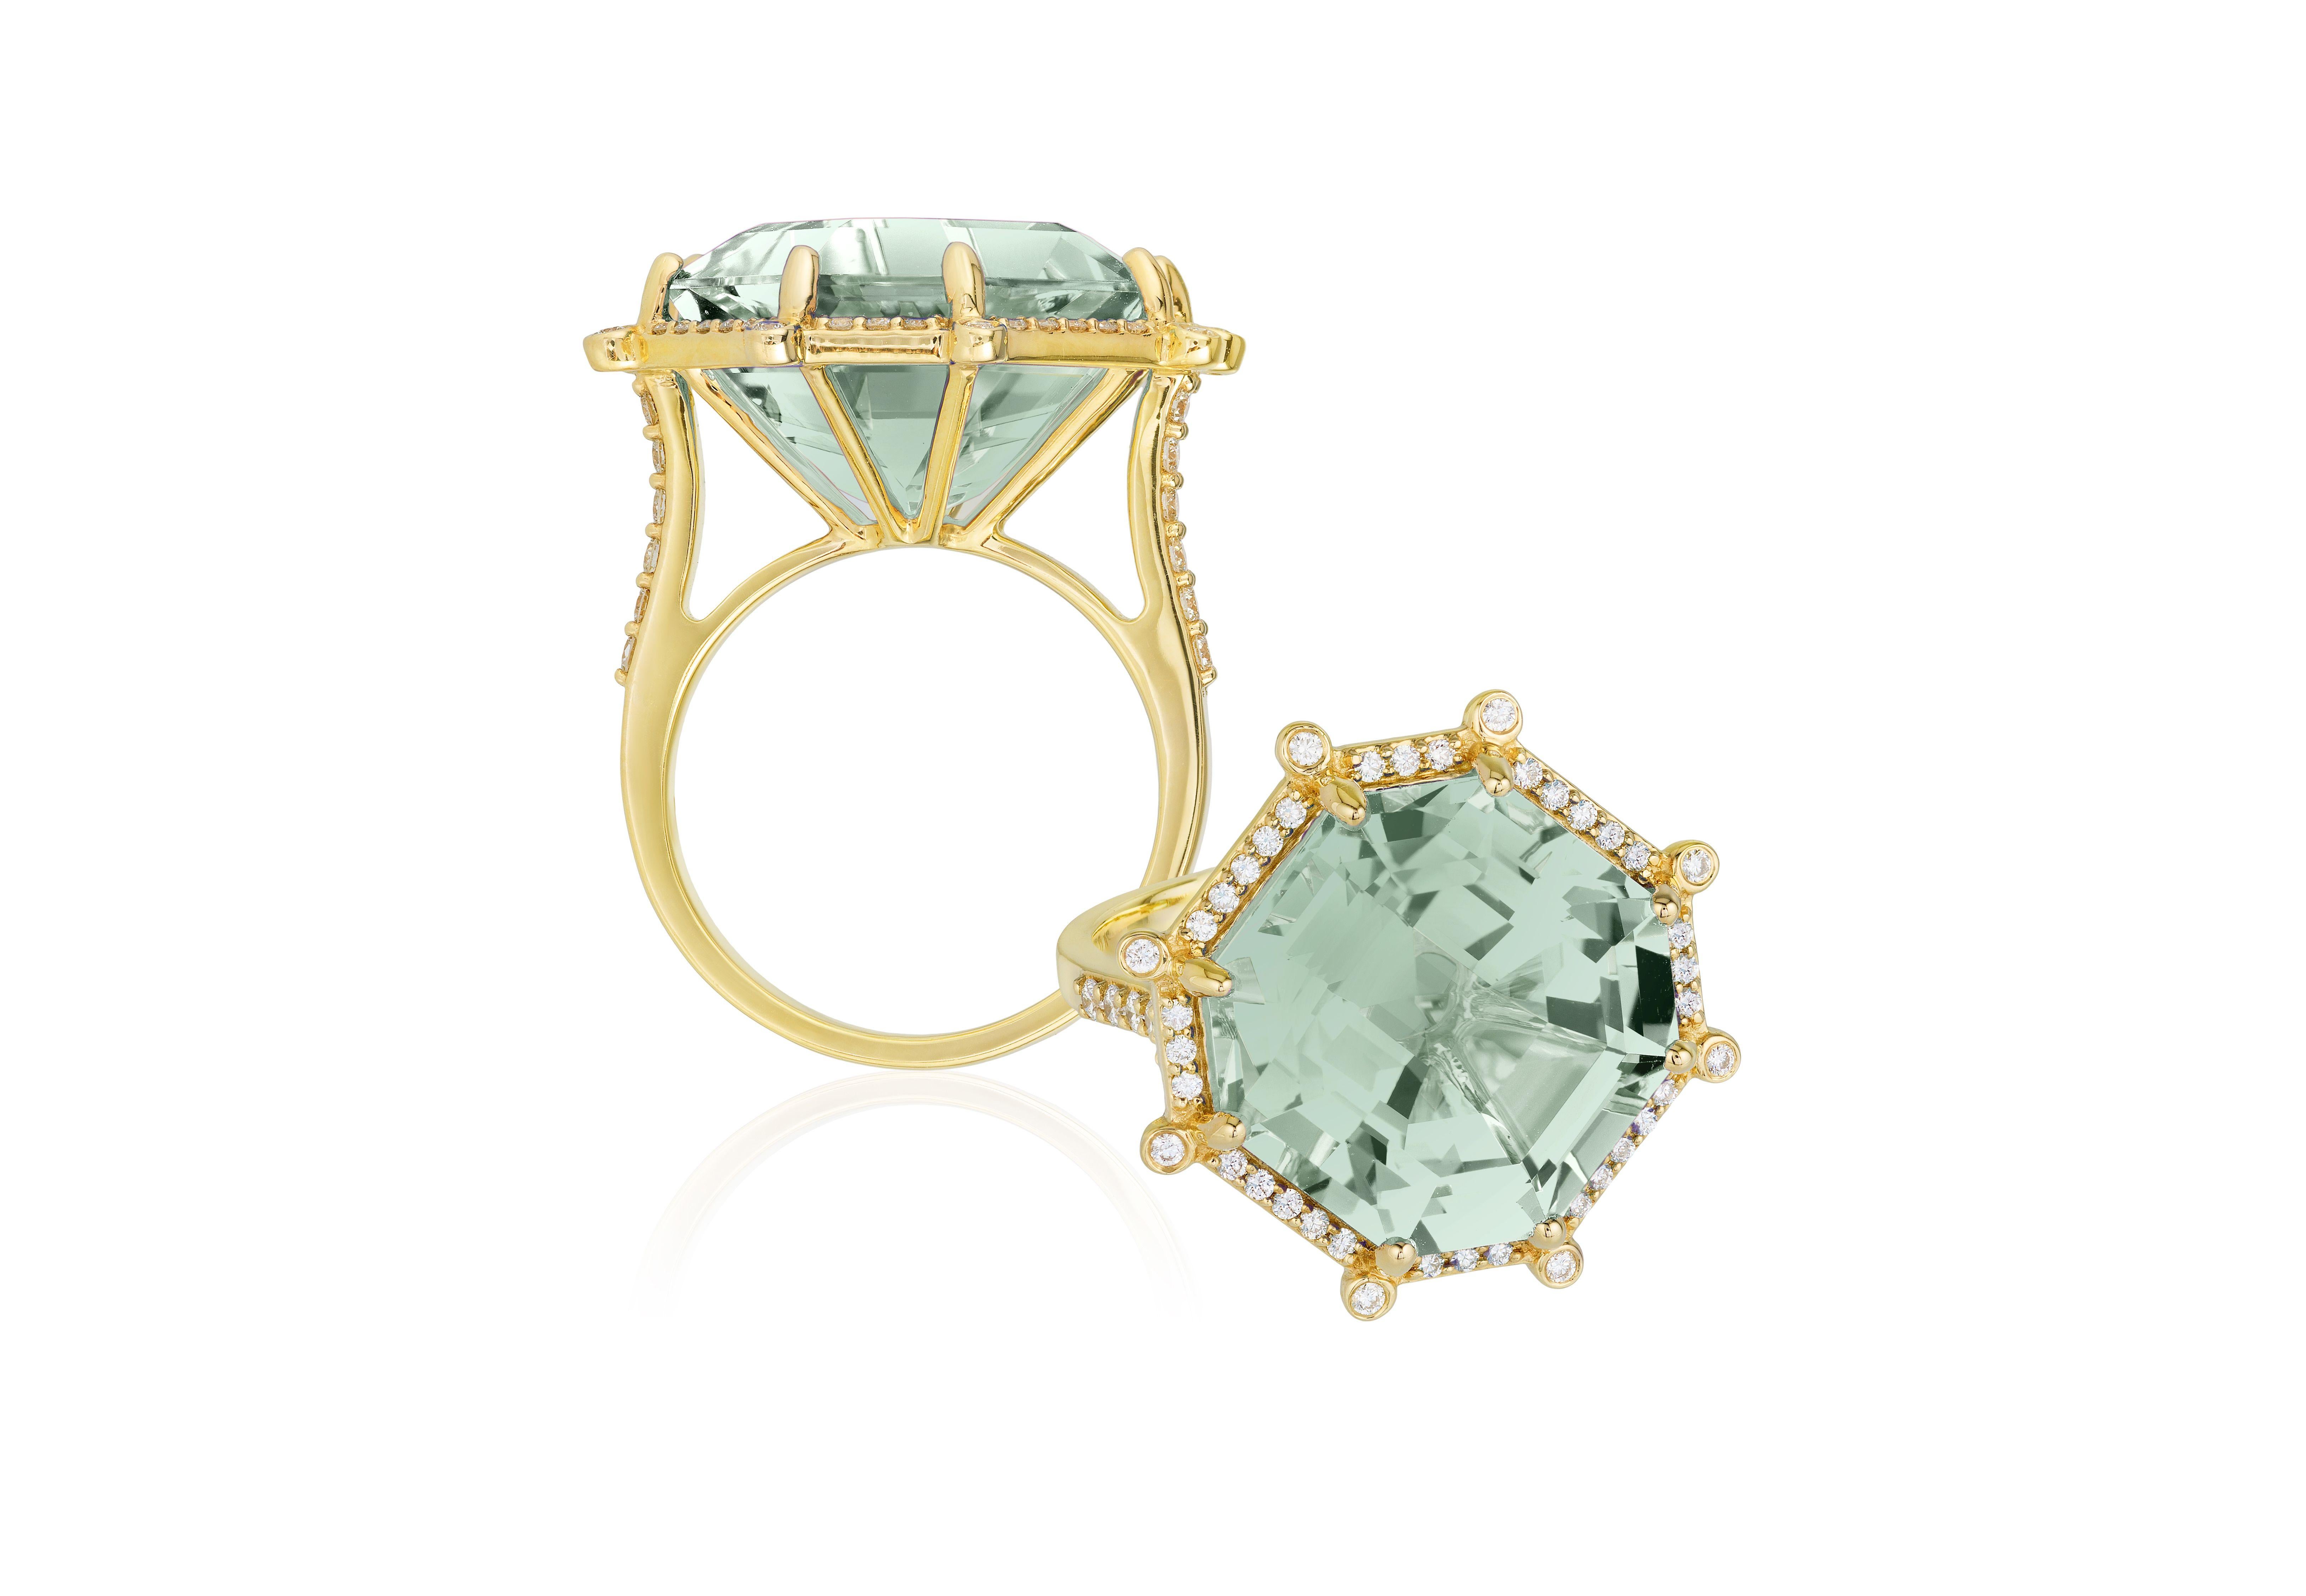 Large Prasiolite Octagon Ring with Diamonds in 18K Yellow Gold, from 'Gossp' Collection

Stone Size: 16 x 16 mm

Gemstone Approx Wt: Parsolite- 14.65 Carats

Diamonds: G-H / VS, Approx Wt: 0.47 Carats